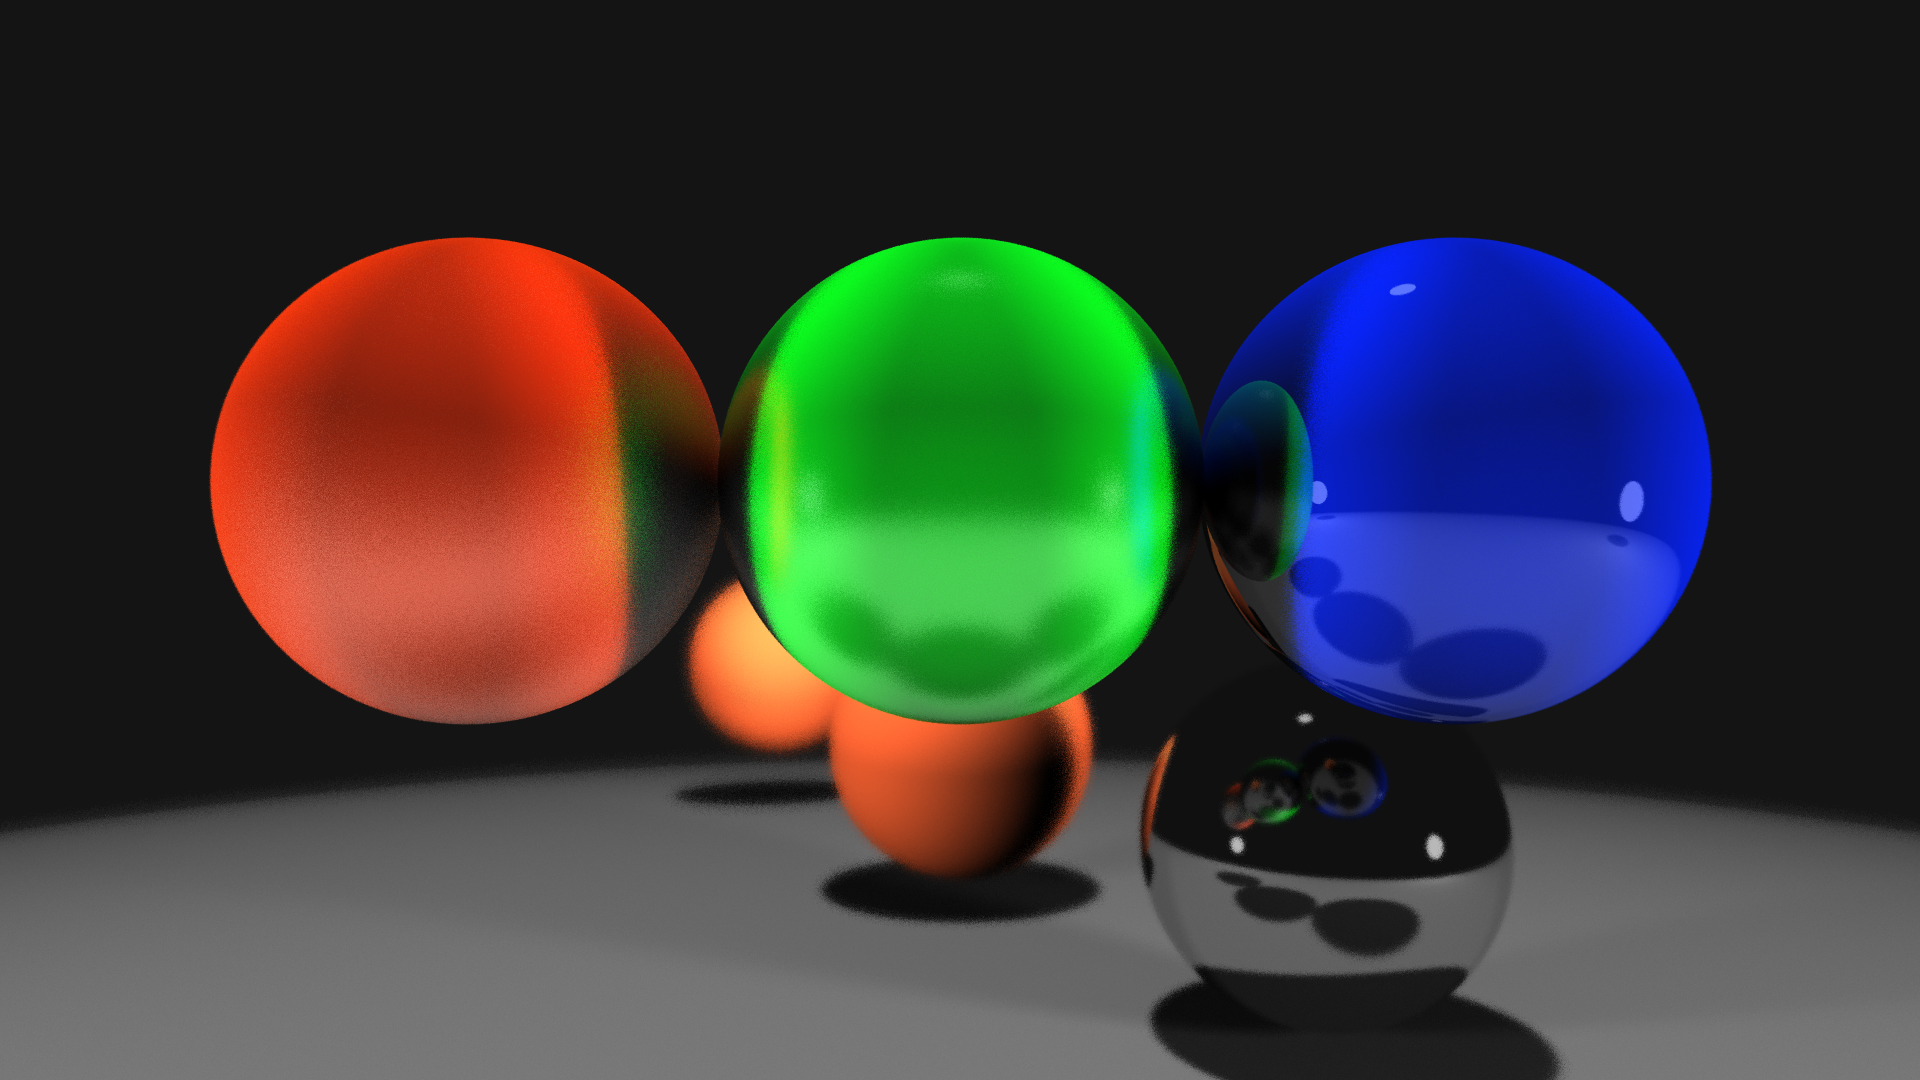 Raytraced result showing three spheres with focal depth